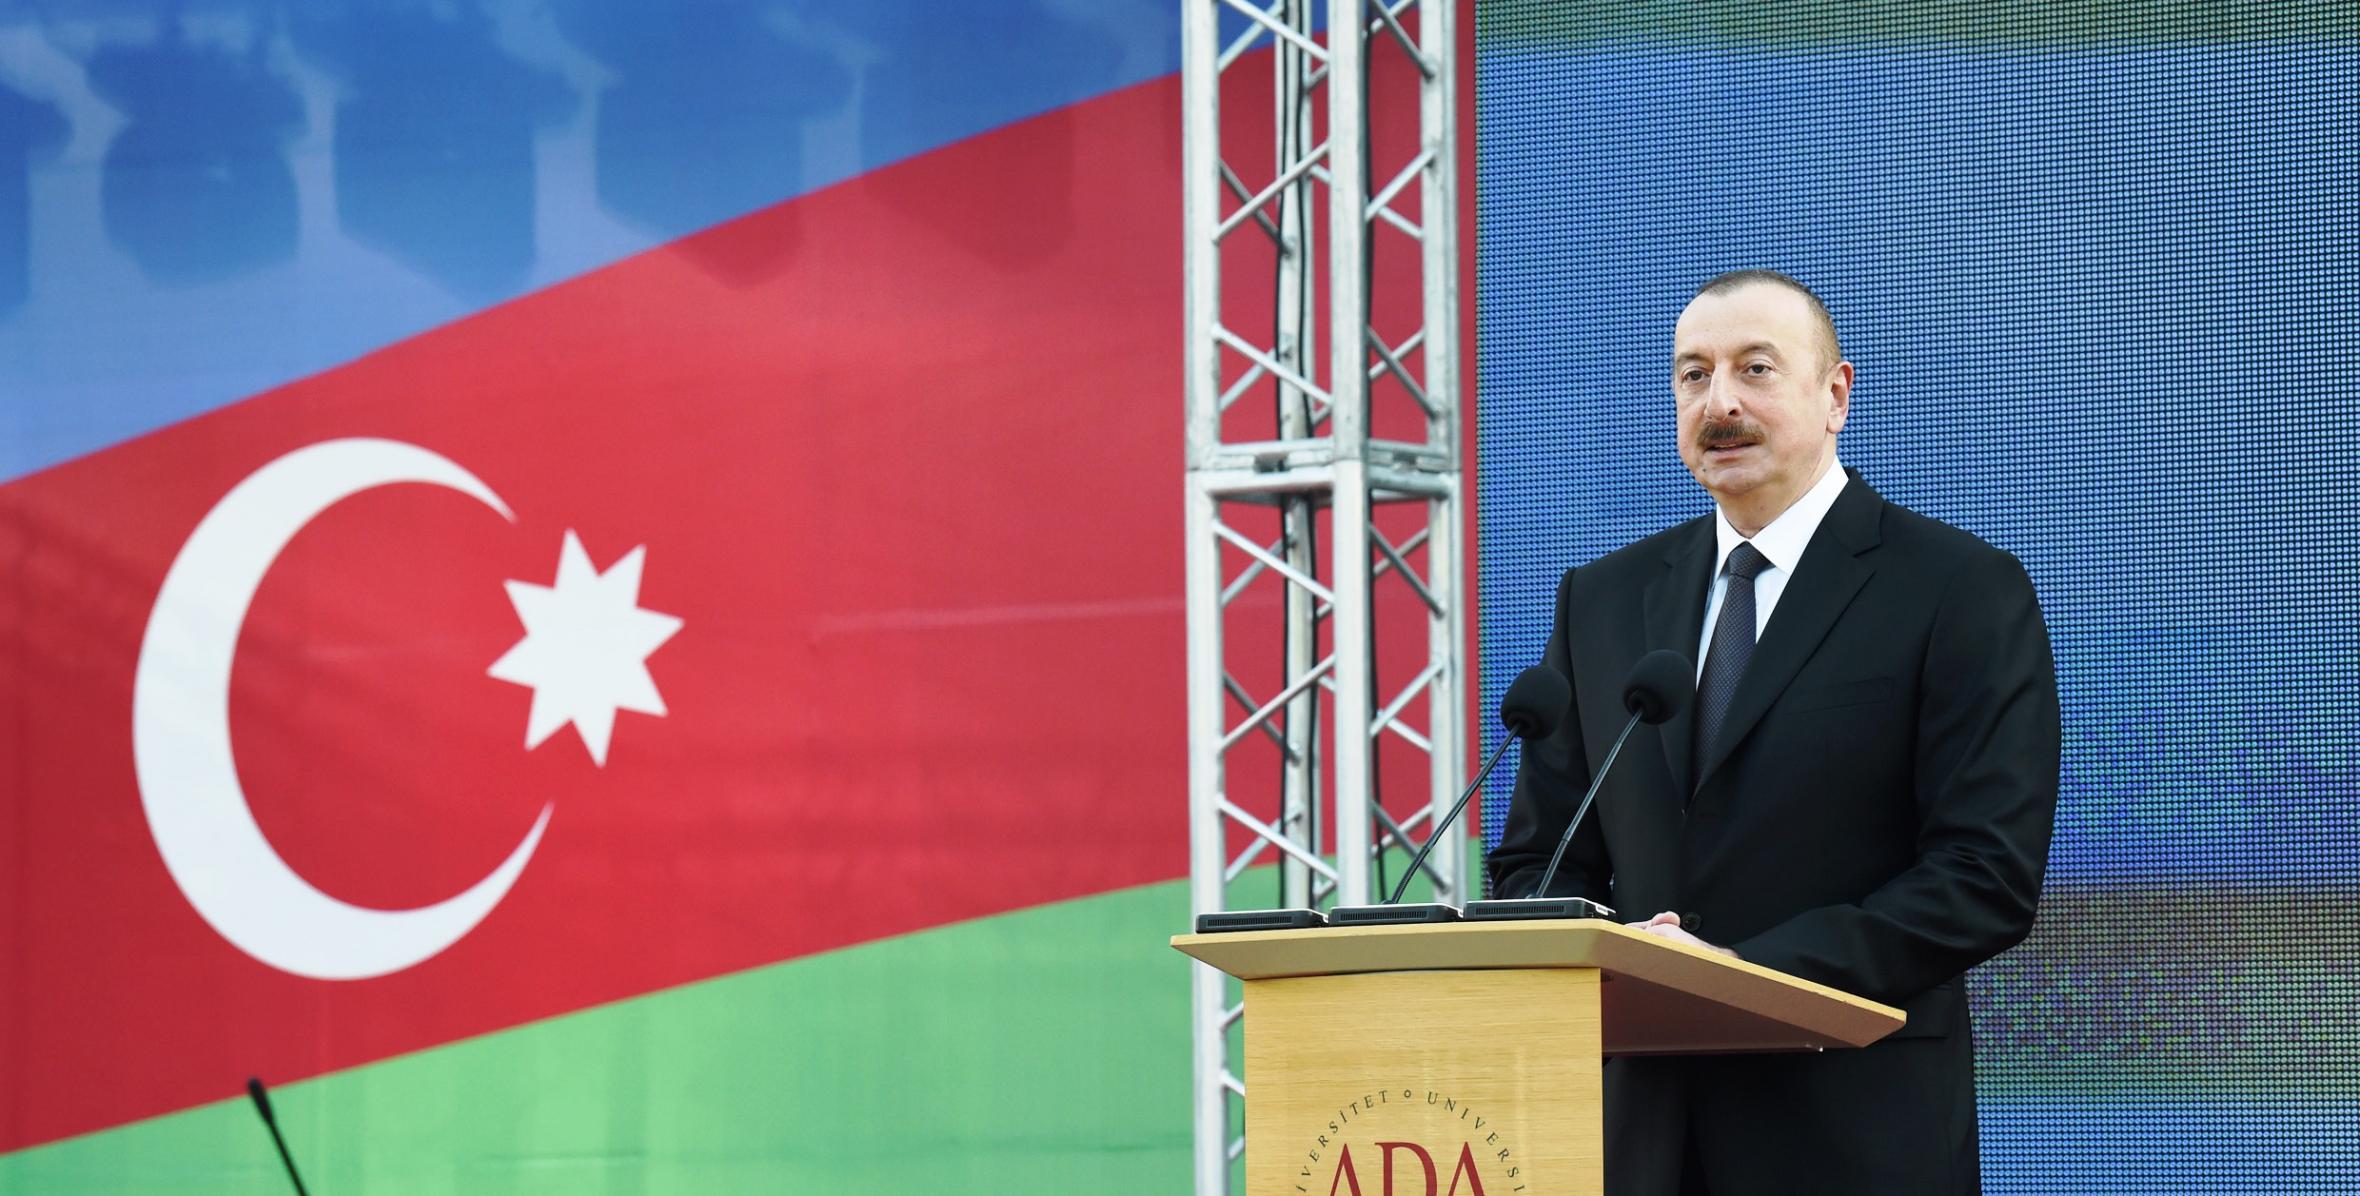 President Ilham Aliyev attended commencement ceremony at ADA University